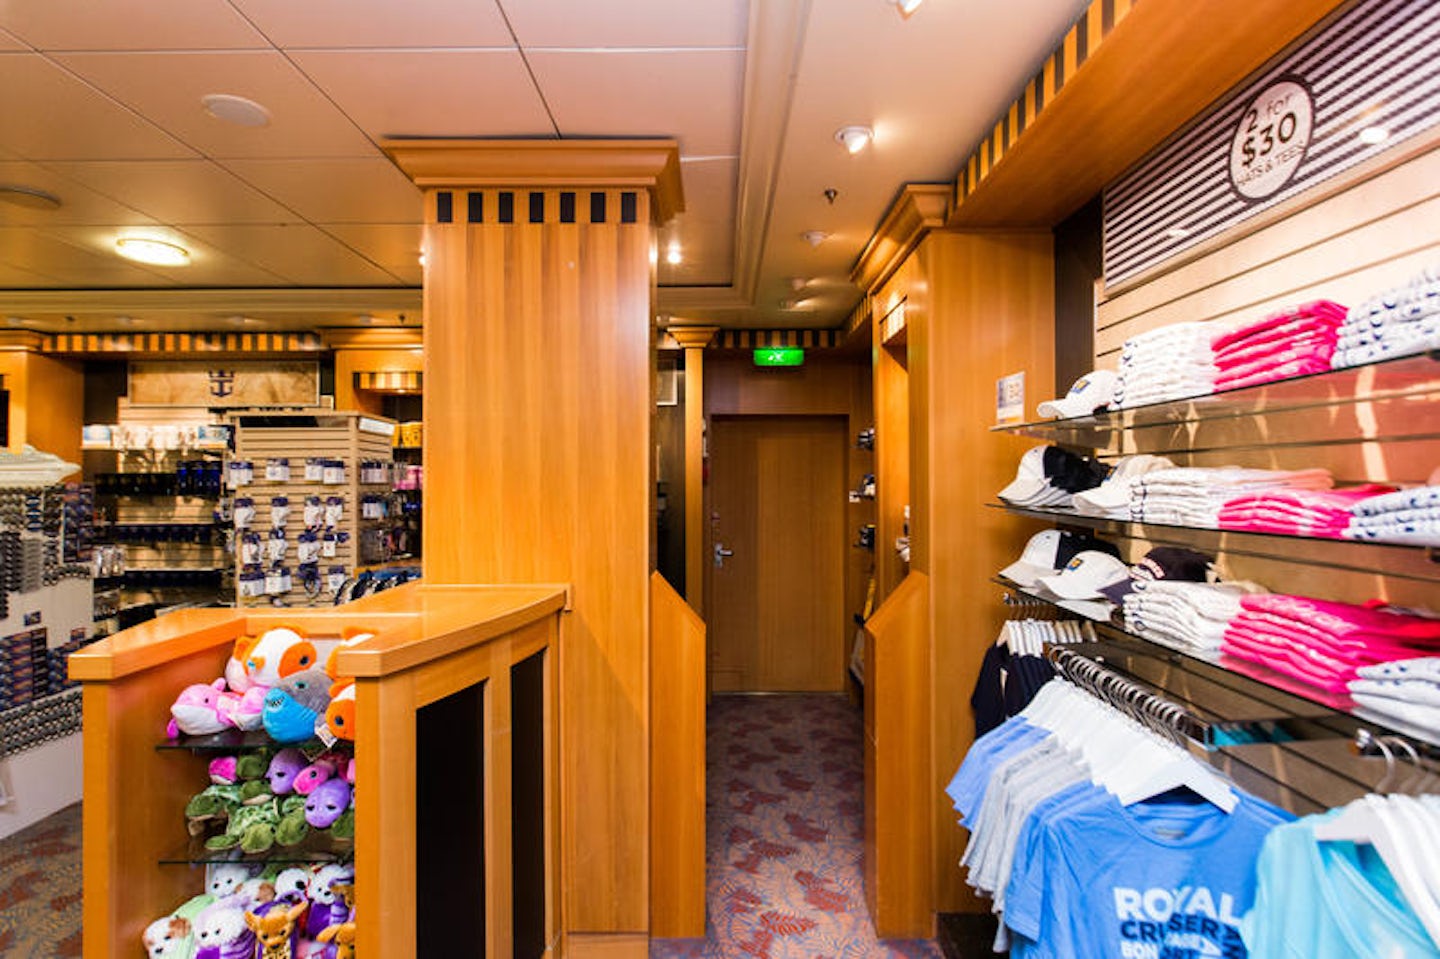 The Shop on Explorer of the Seas